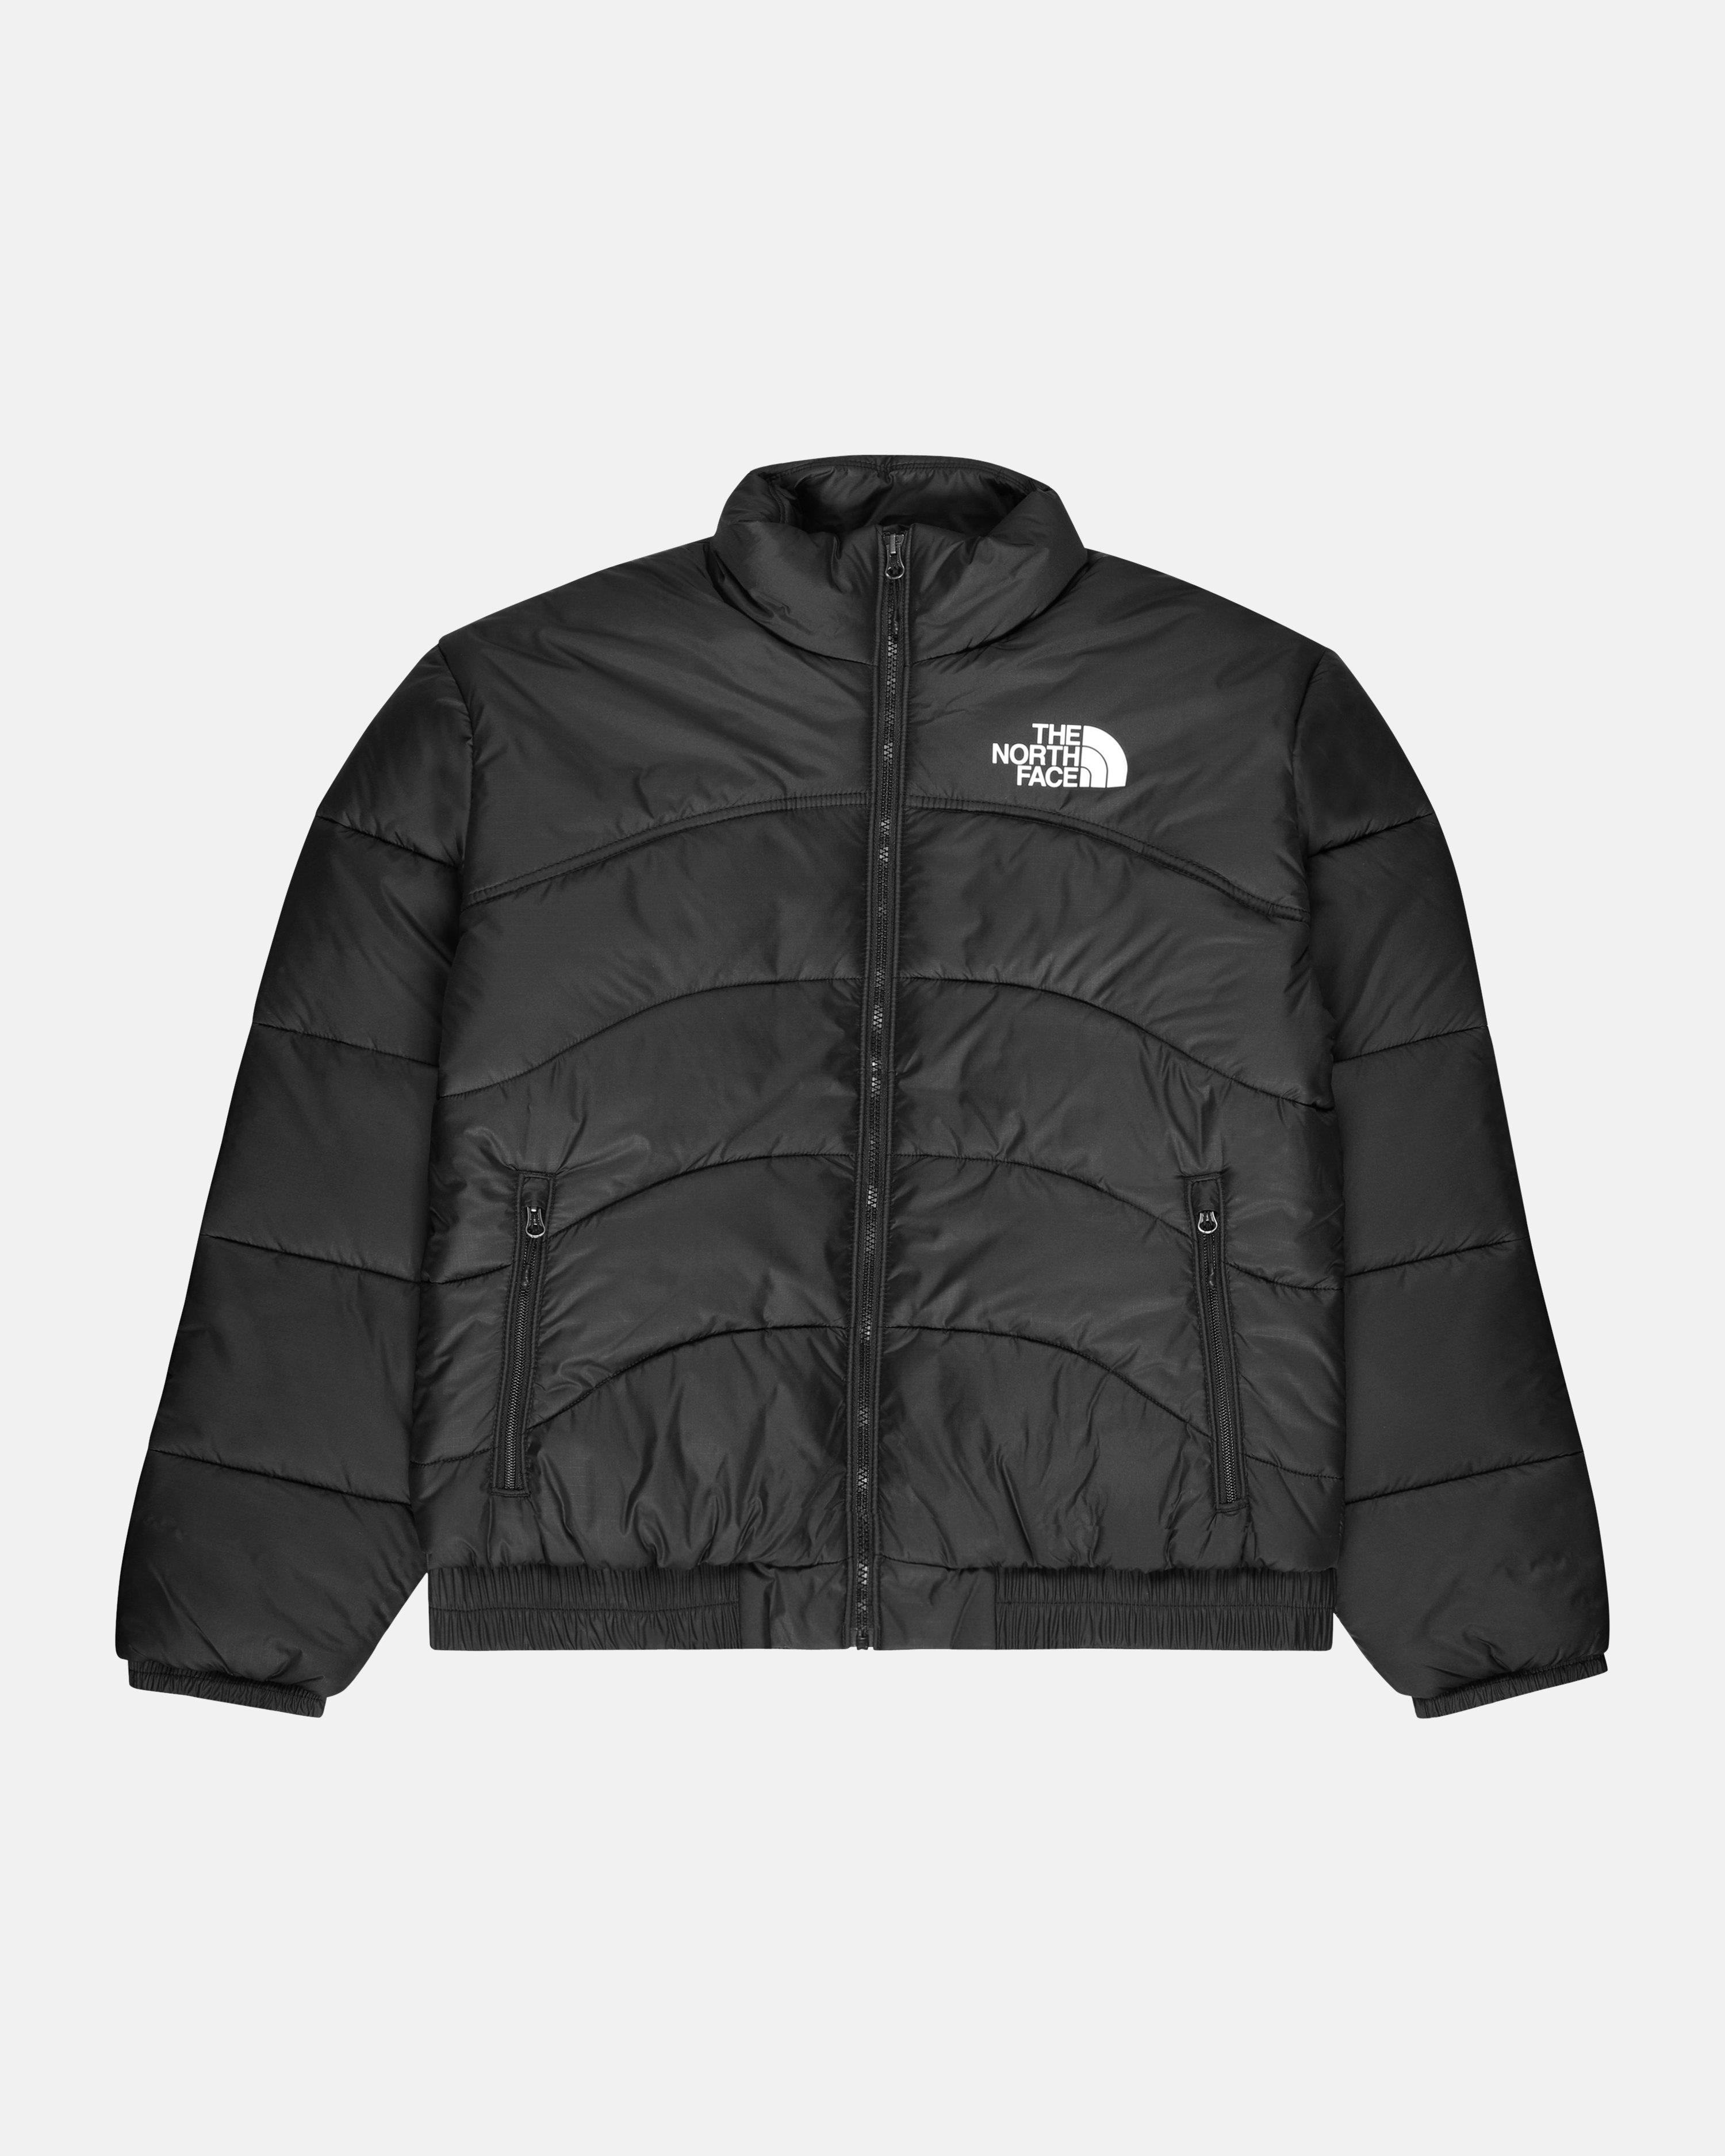 The North Face 2000 Synthetic Puffer Jacket Black, Men